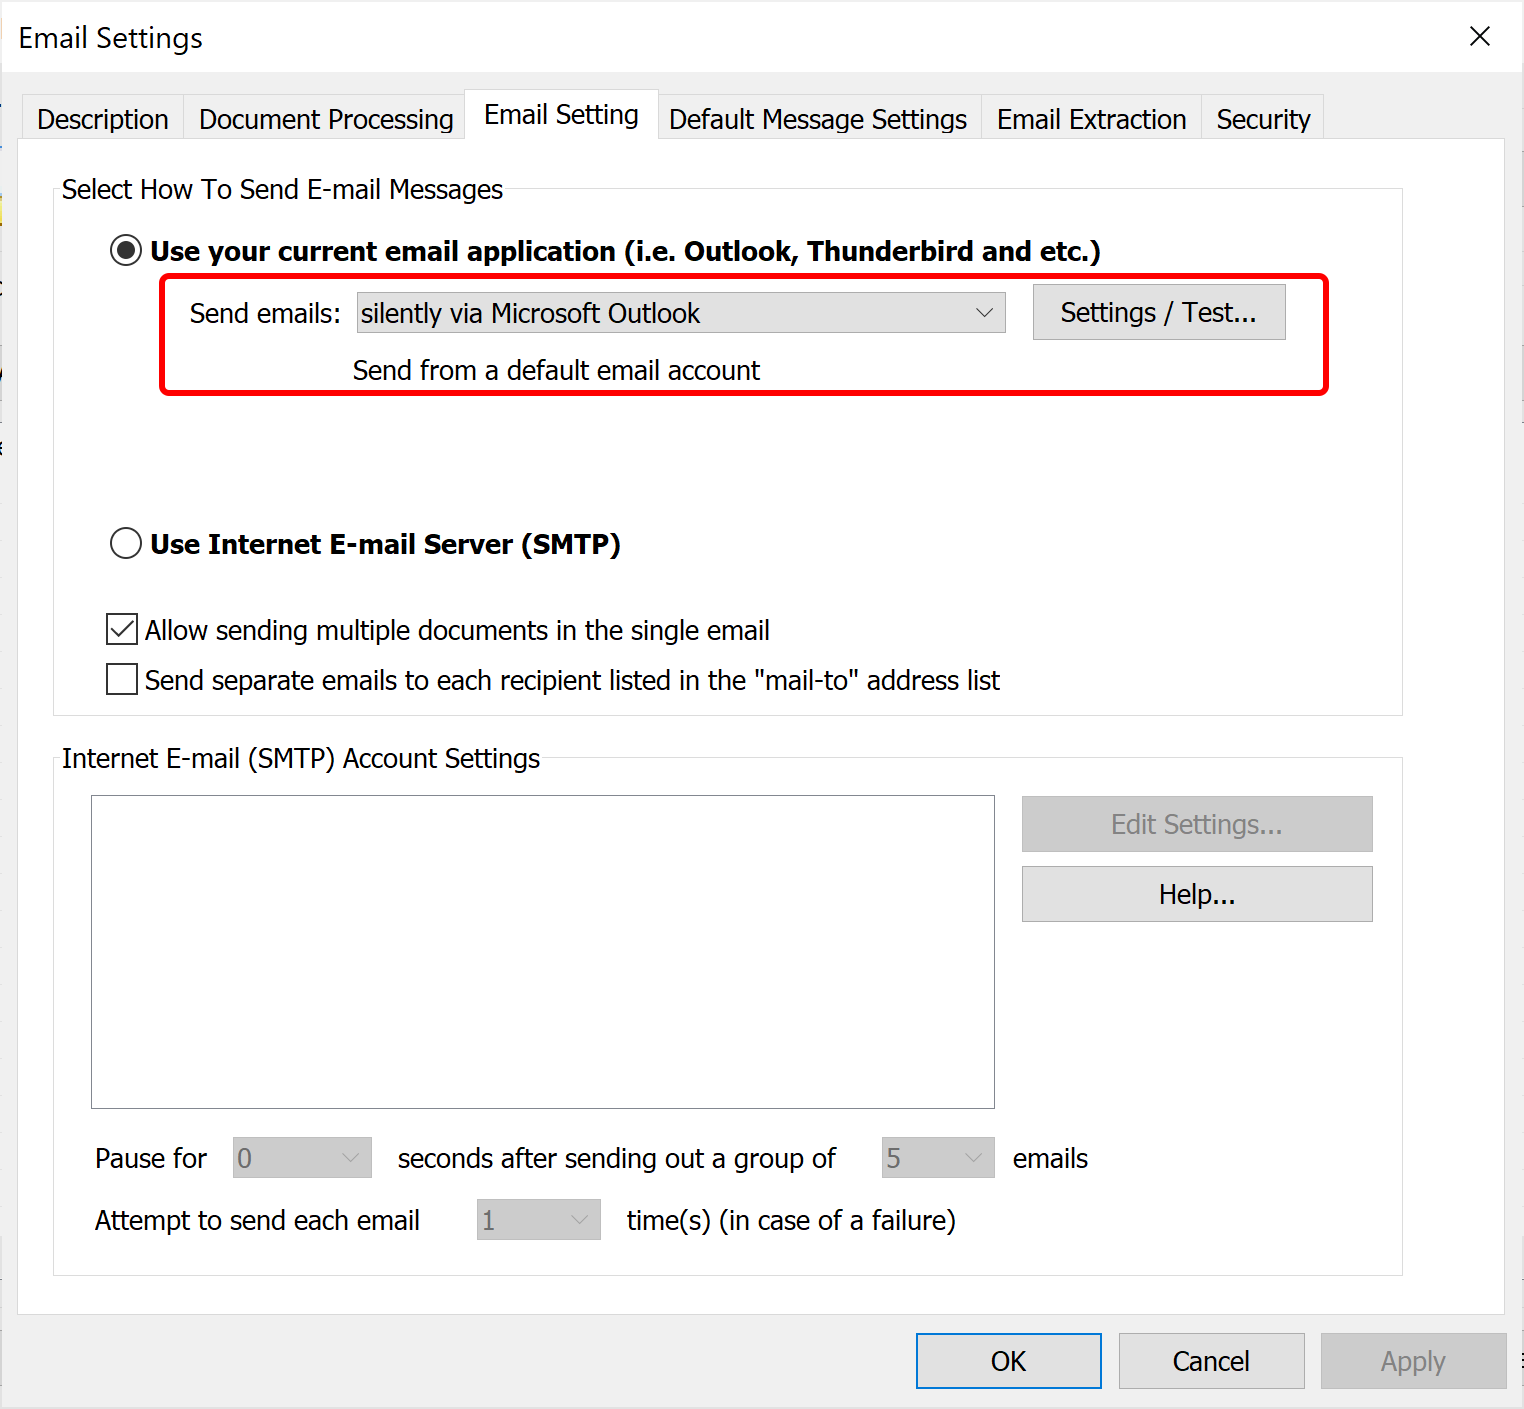 Select emailing option to send via Outlook